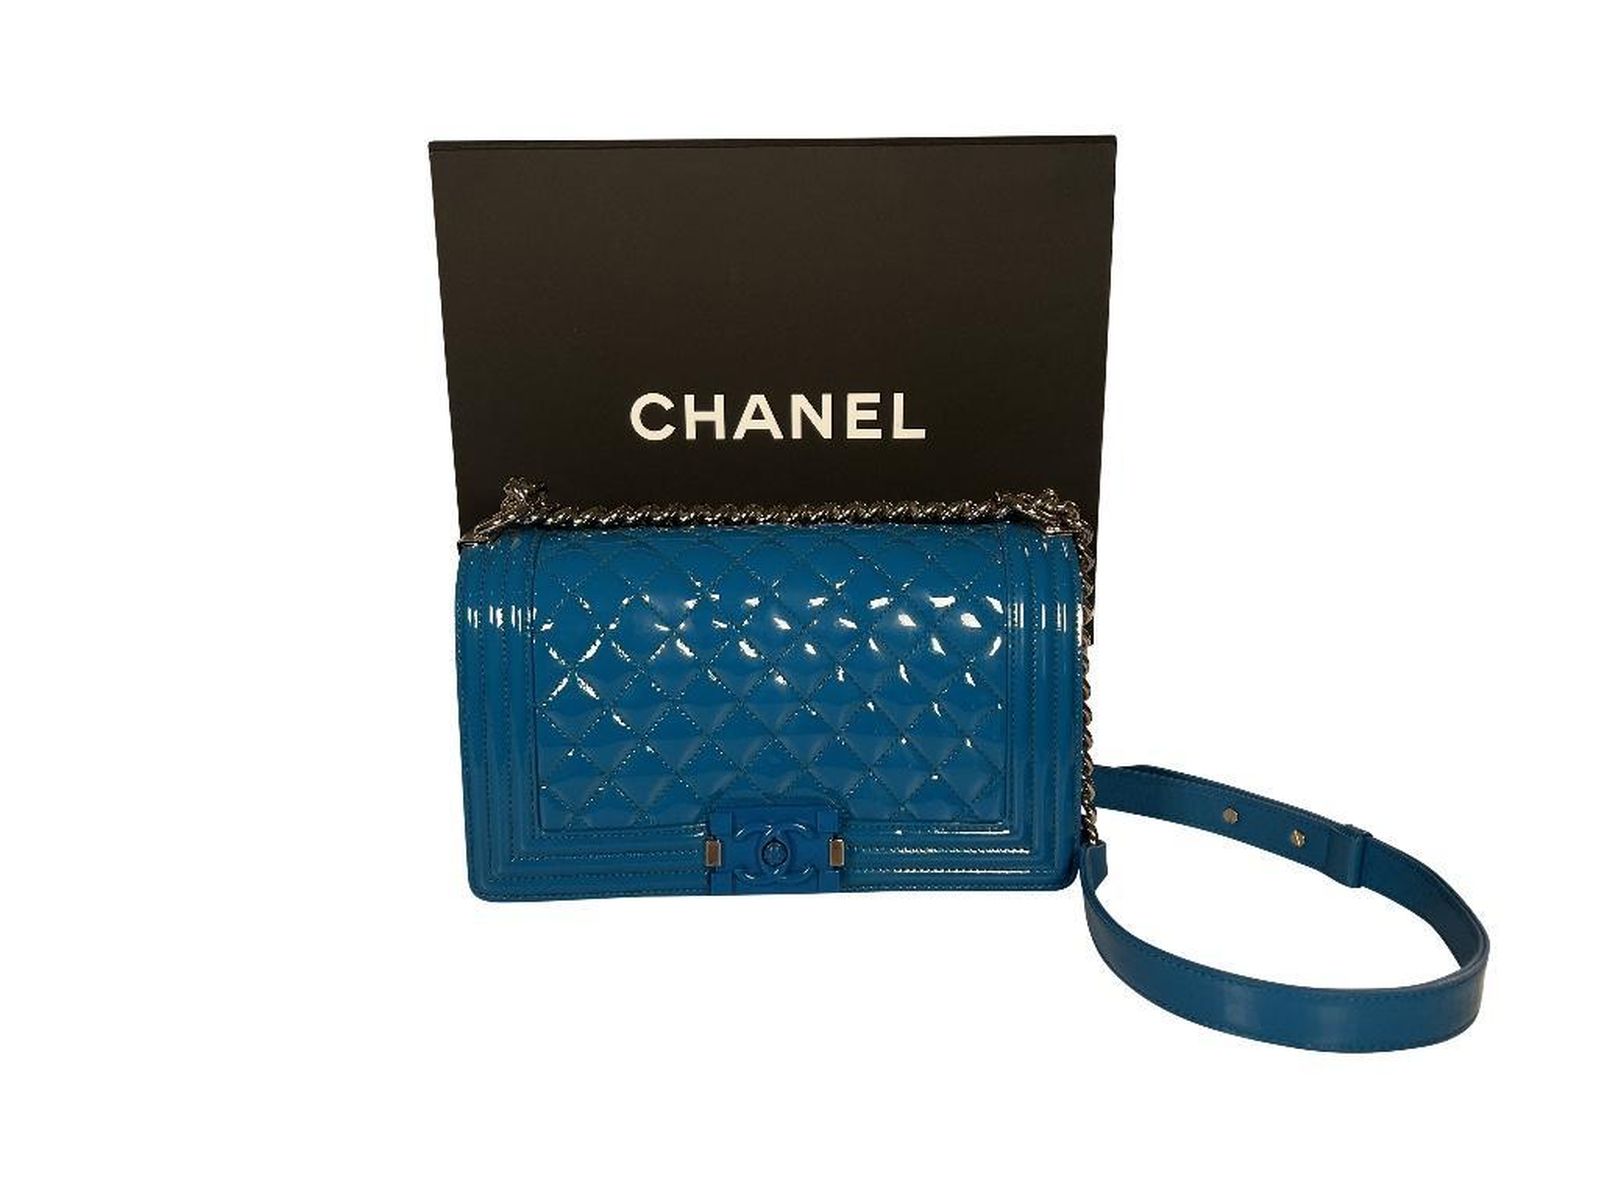 Chanel Blue Quilted Patent Leather Medium Boy Bag - Image 2 of 8